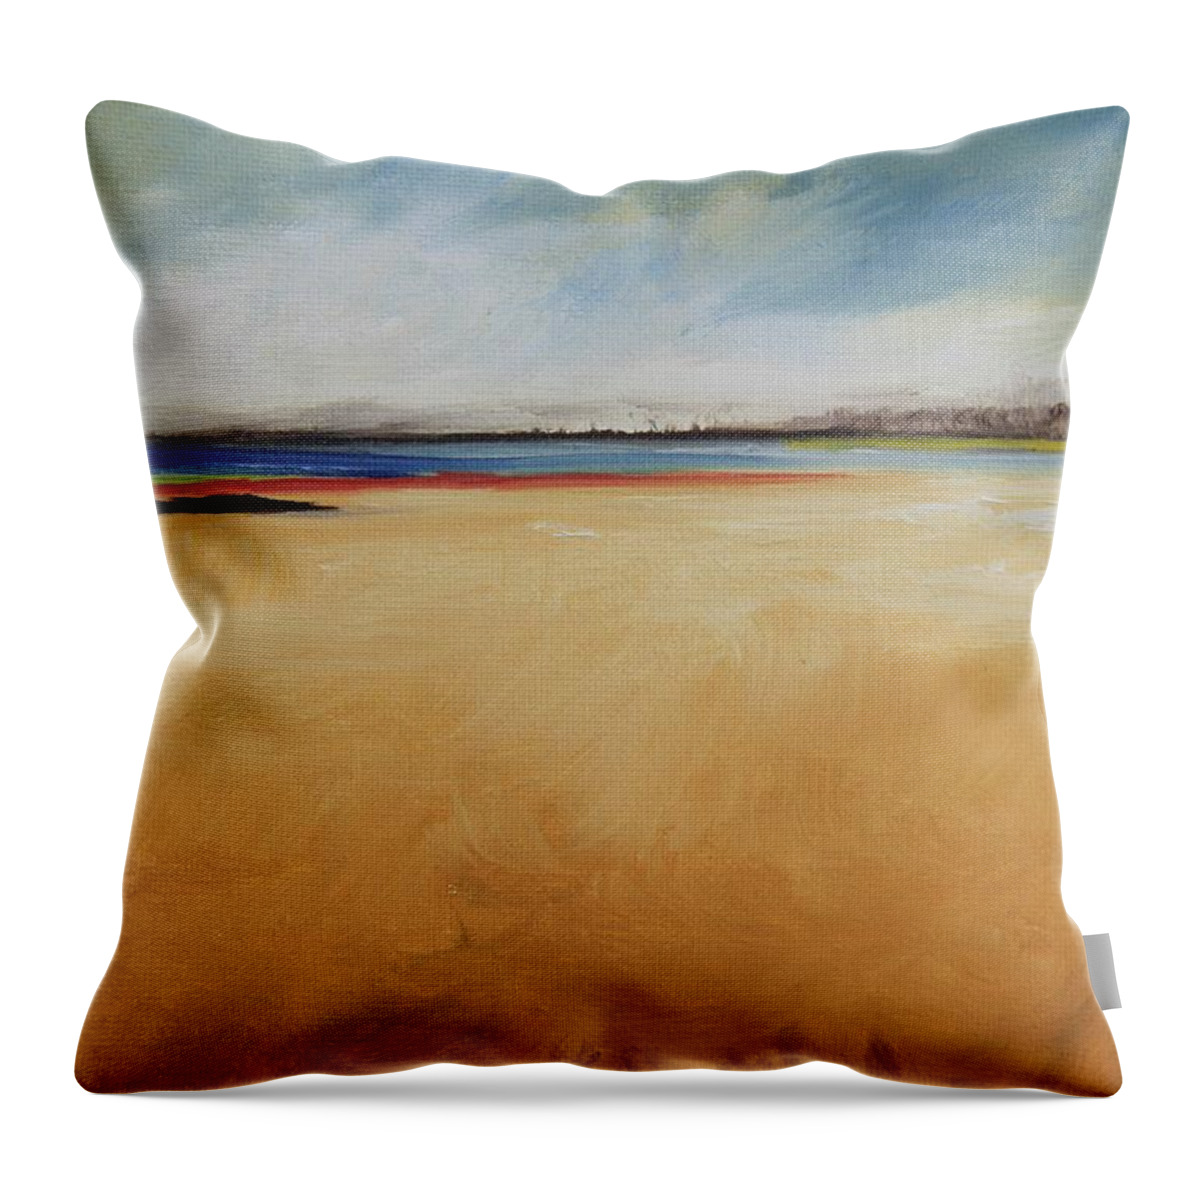 Abstract Art Throw Pillow featuring the painting Playa Libre by Alicia Maury